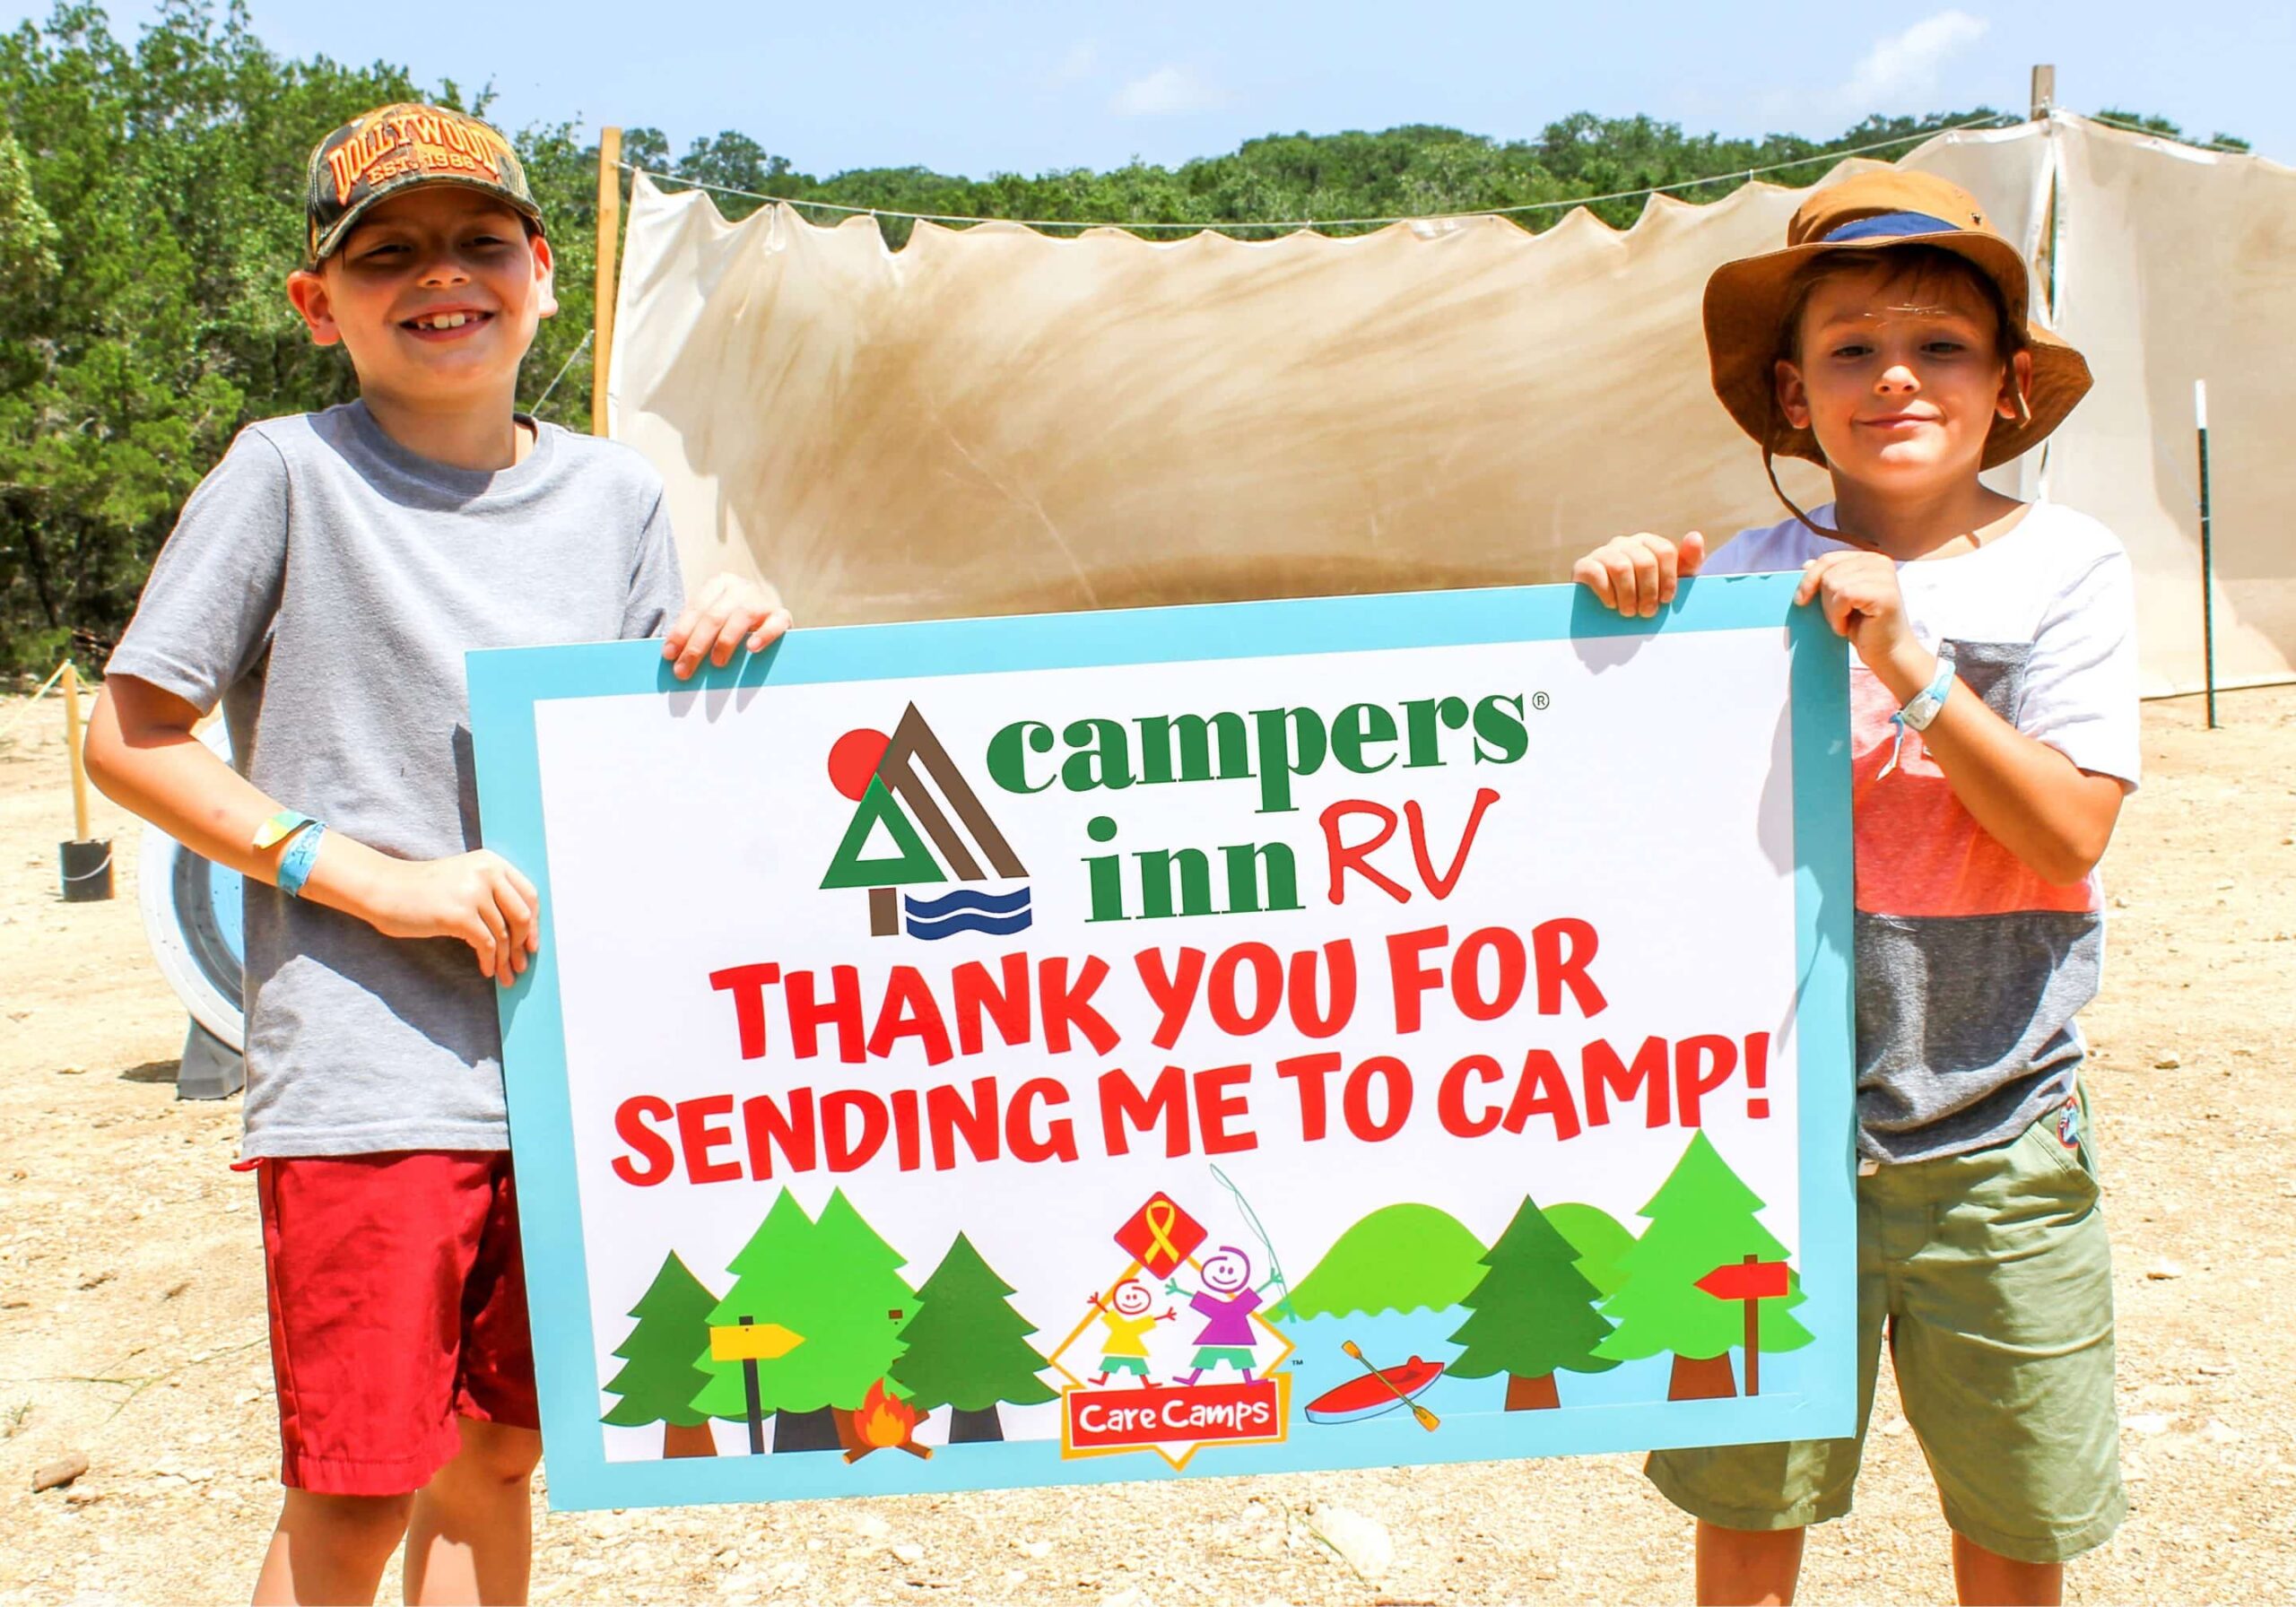 Campers Inn RV Donates More Than $700,000 to Care Camps – RVBusiness – Breaking RV Industry News